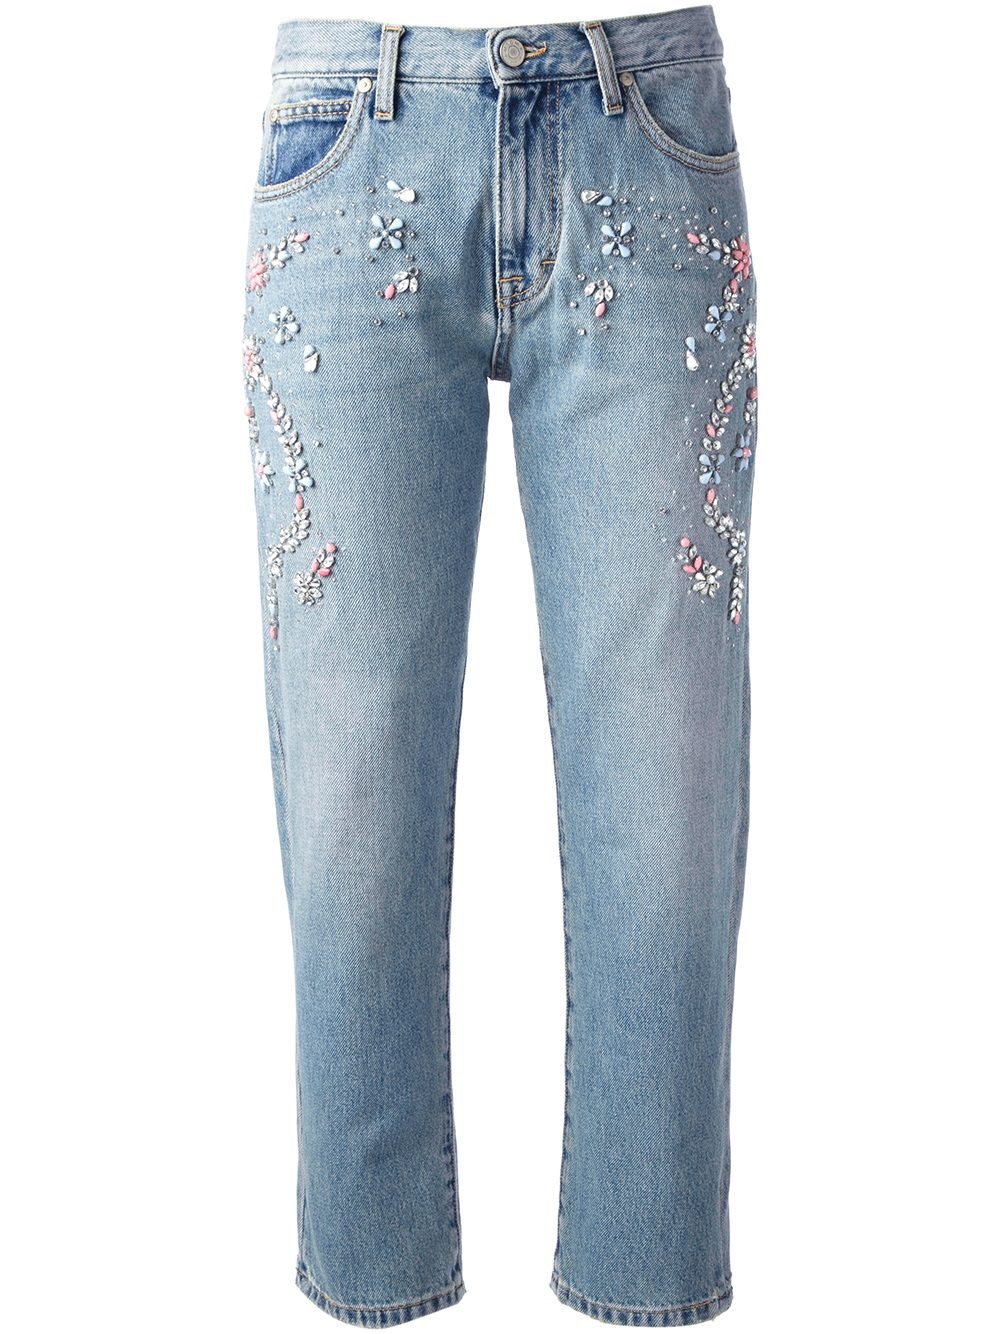 MSGM Embellished Jeans in Blue - Lyst